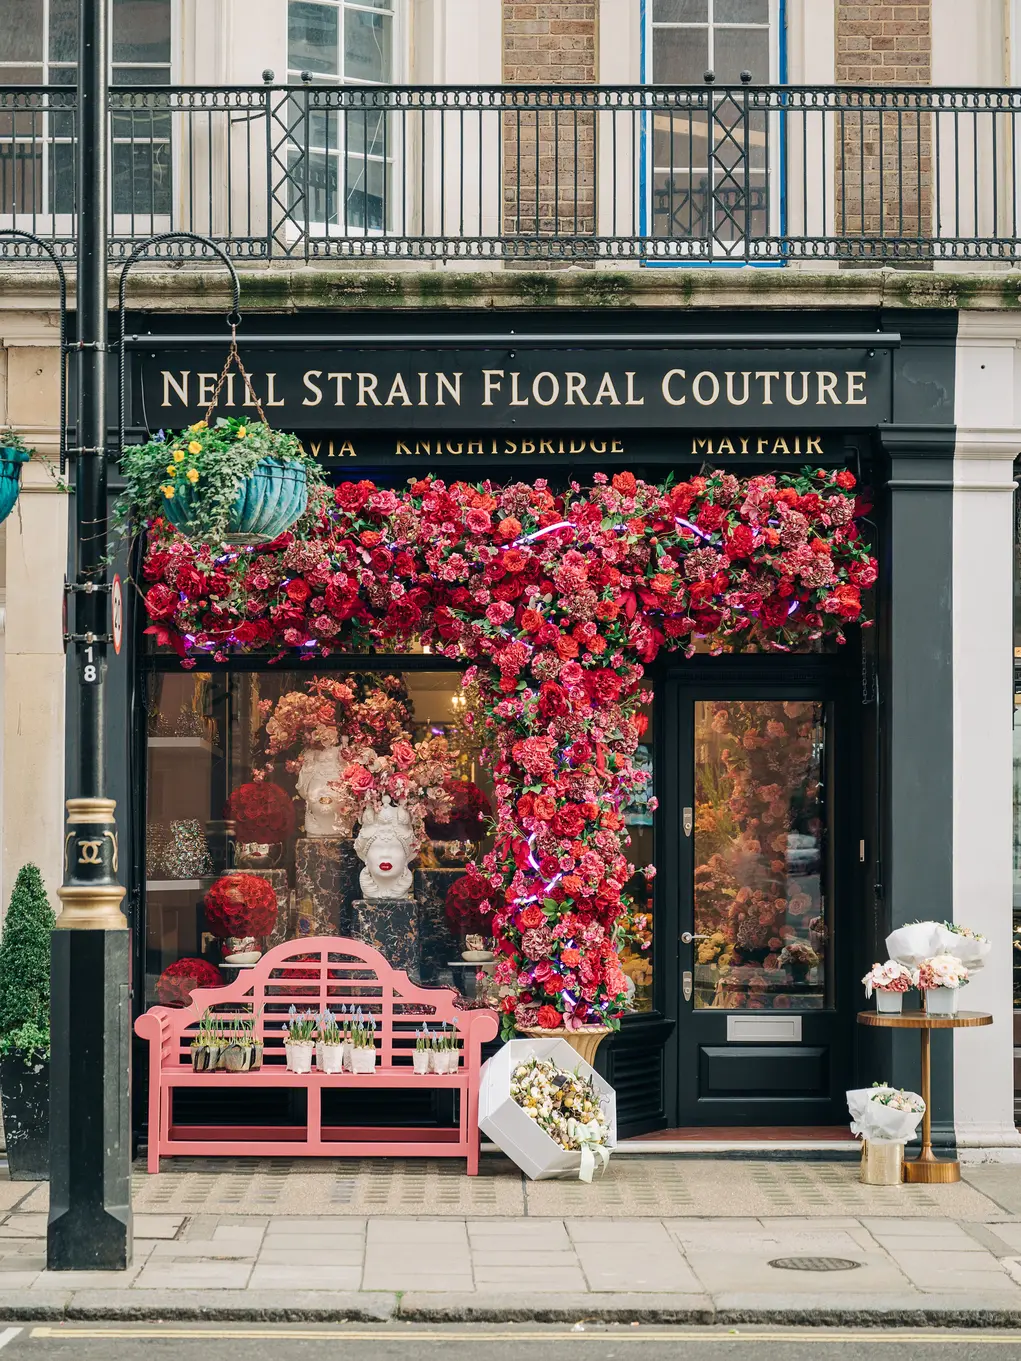 Exterior of the Neill Strain florist with a huge flower display